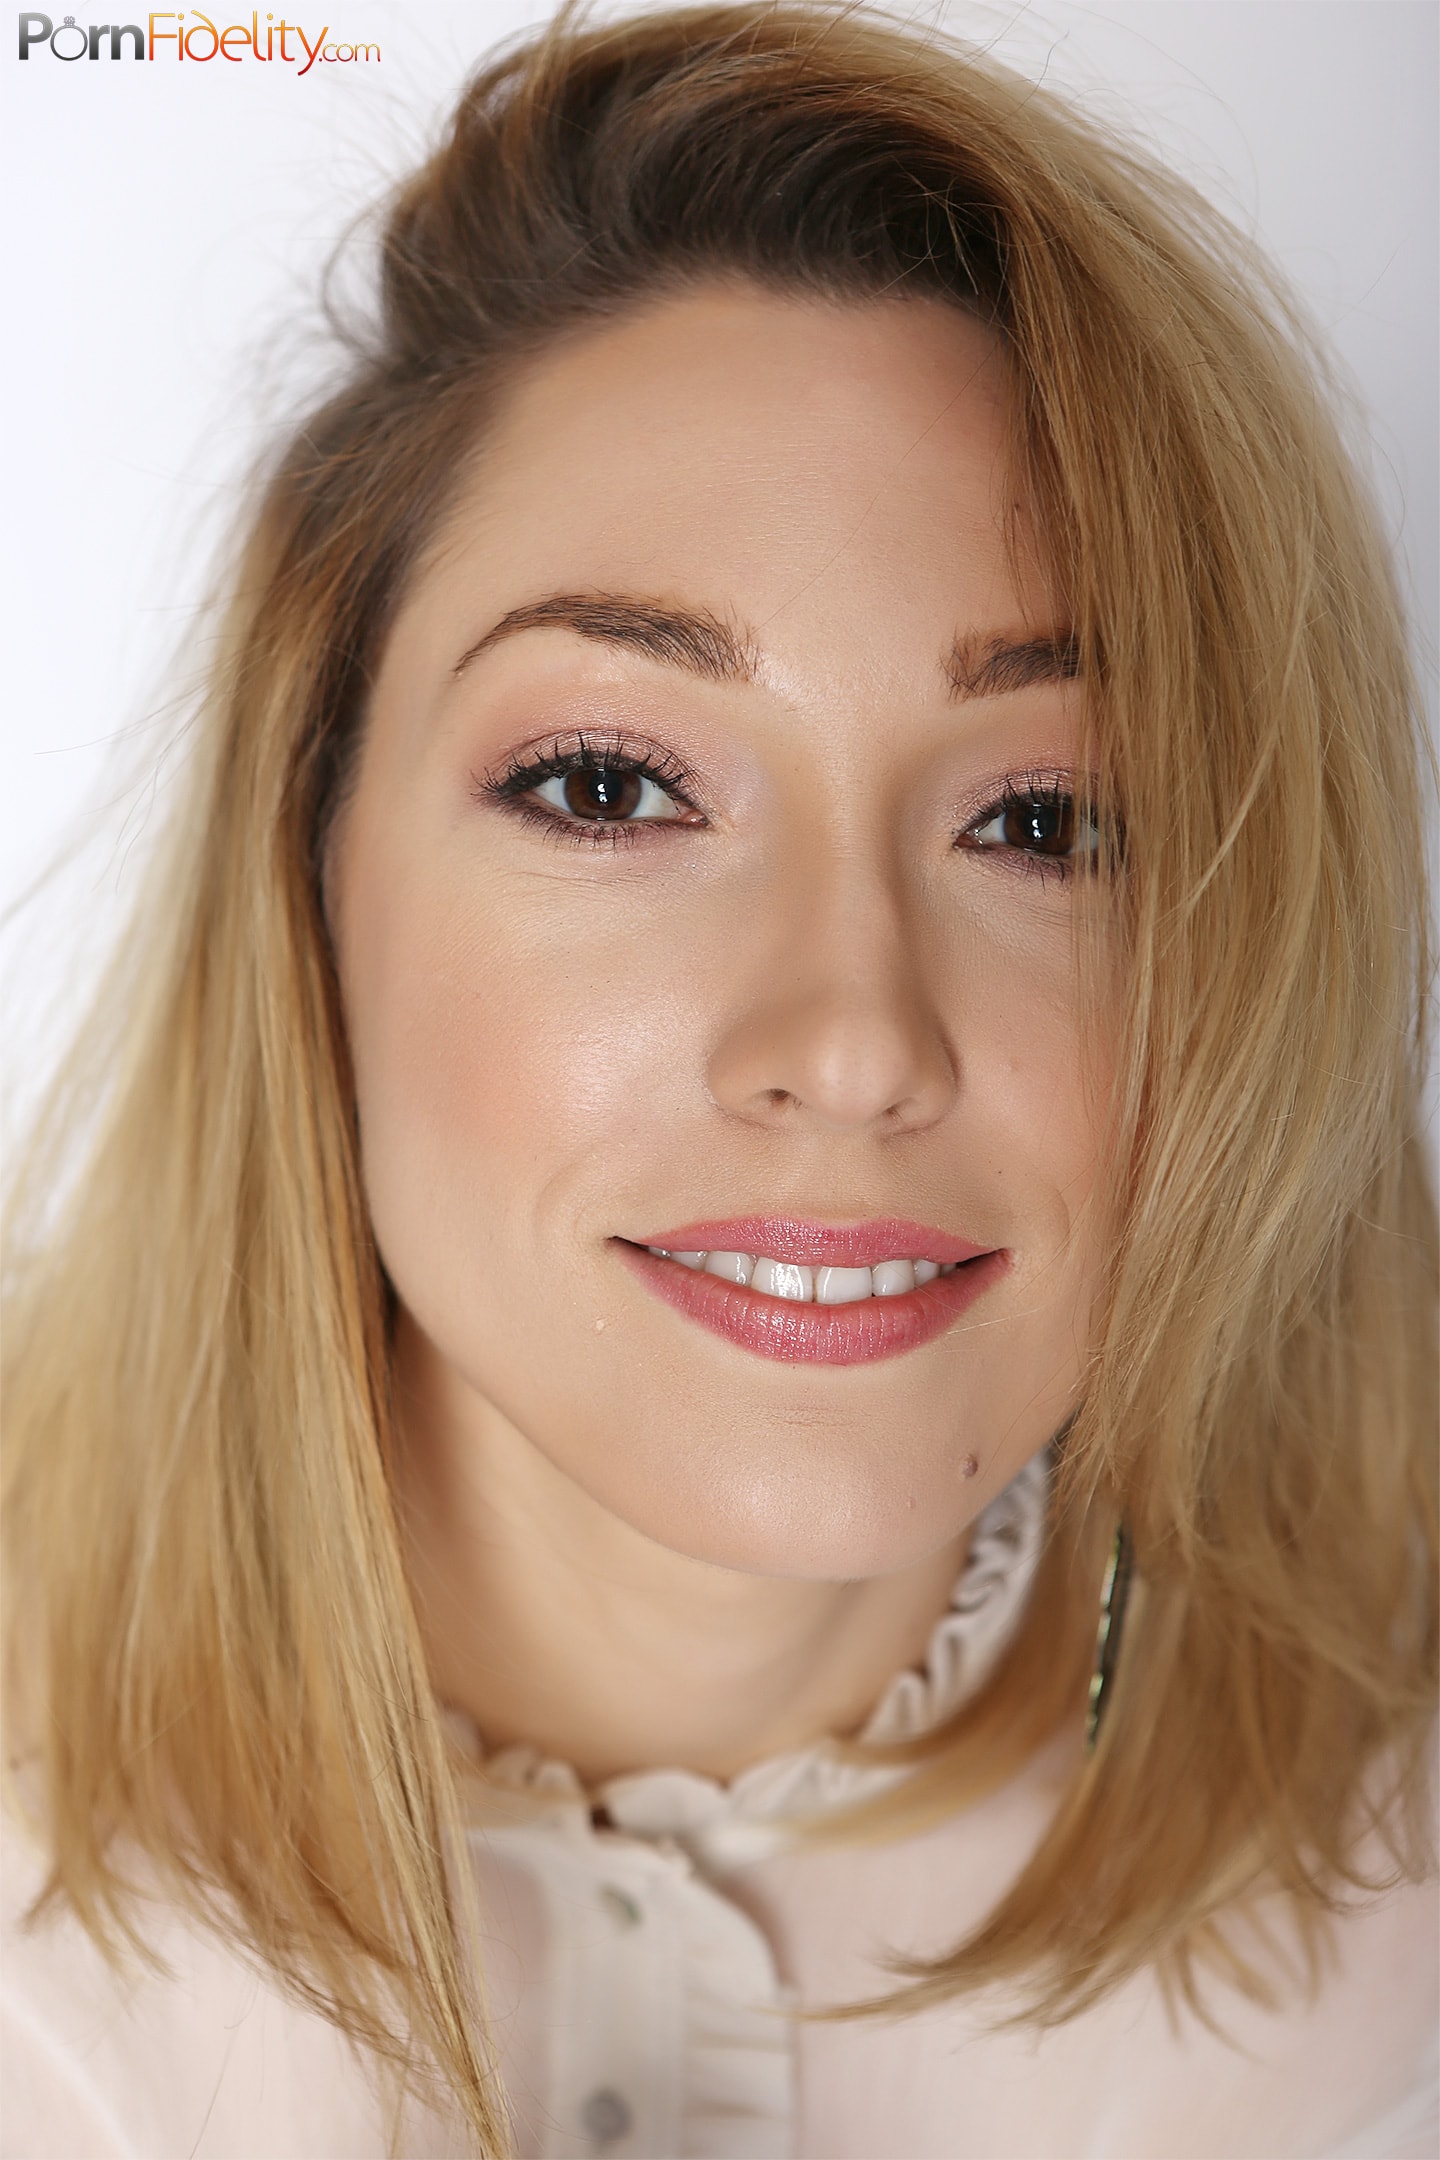 Porn Fidelity 'Real Life 18' starring Lily LaBeau (Photo 49)